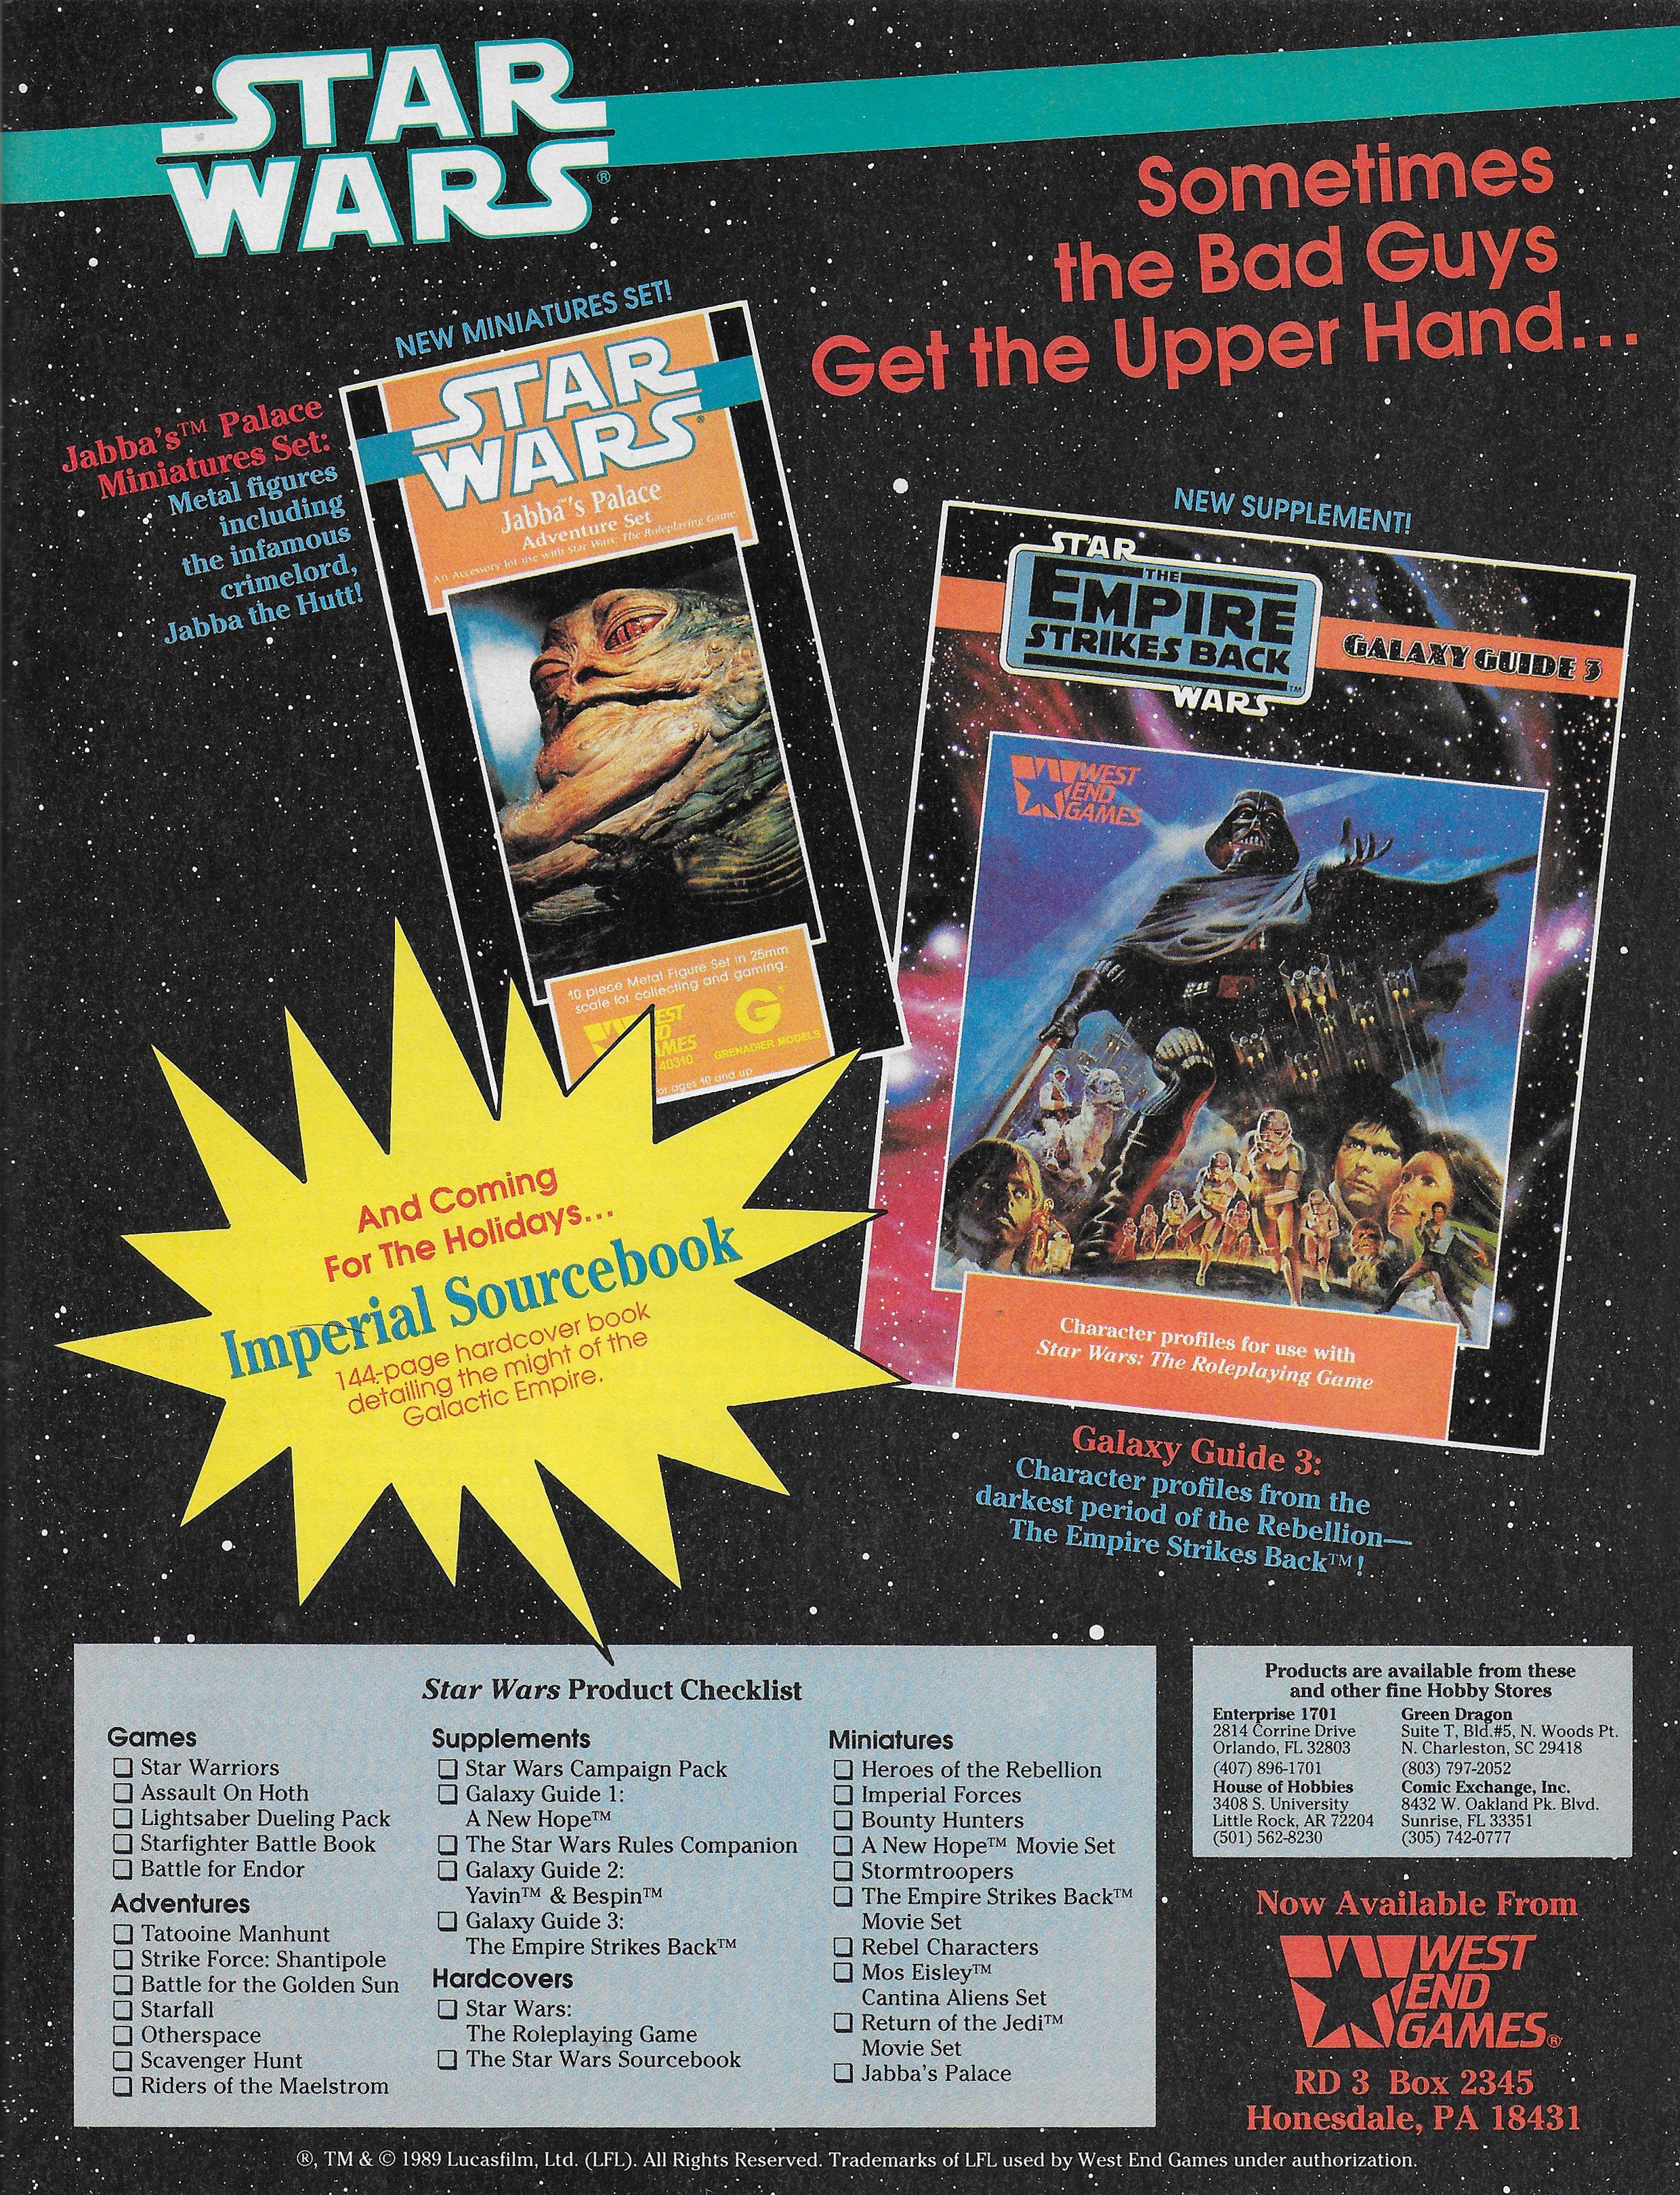 West End Games - Star Wars: The Roleplaying Game Miniatures (Vehicles)  (1988-99)